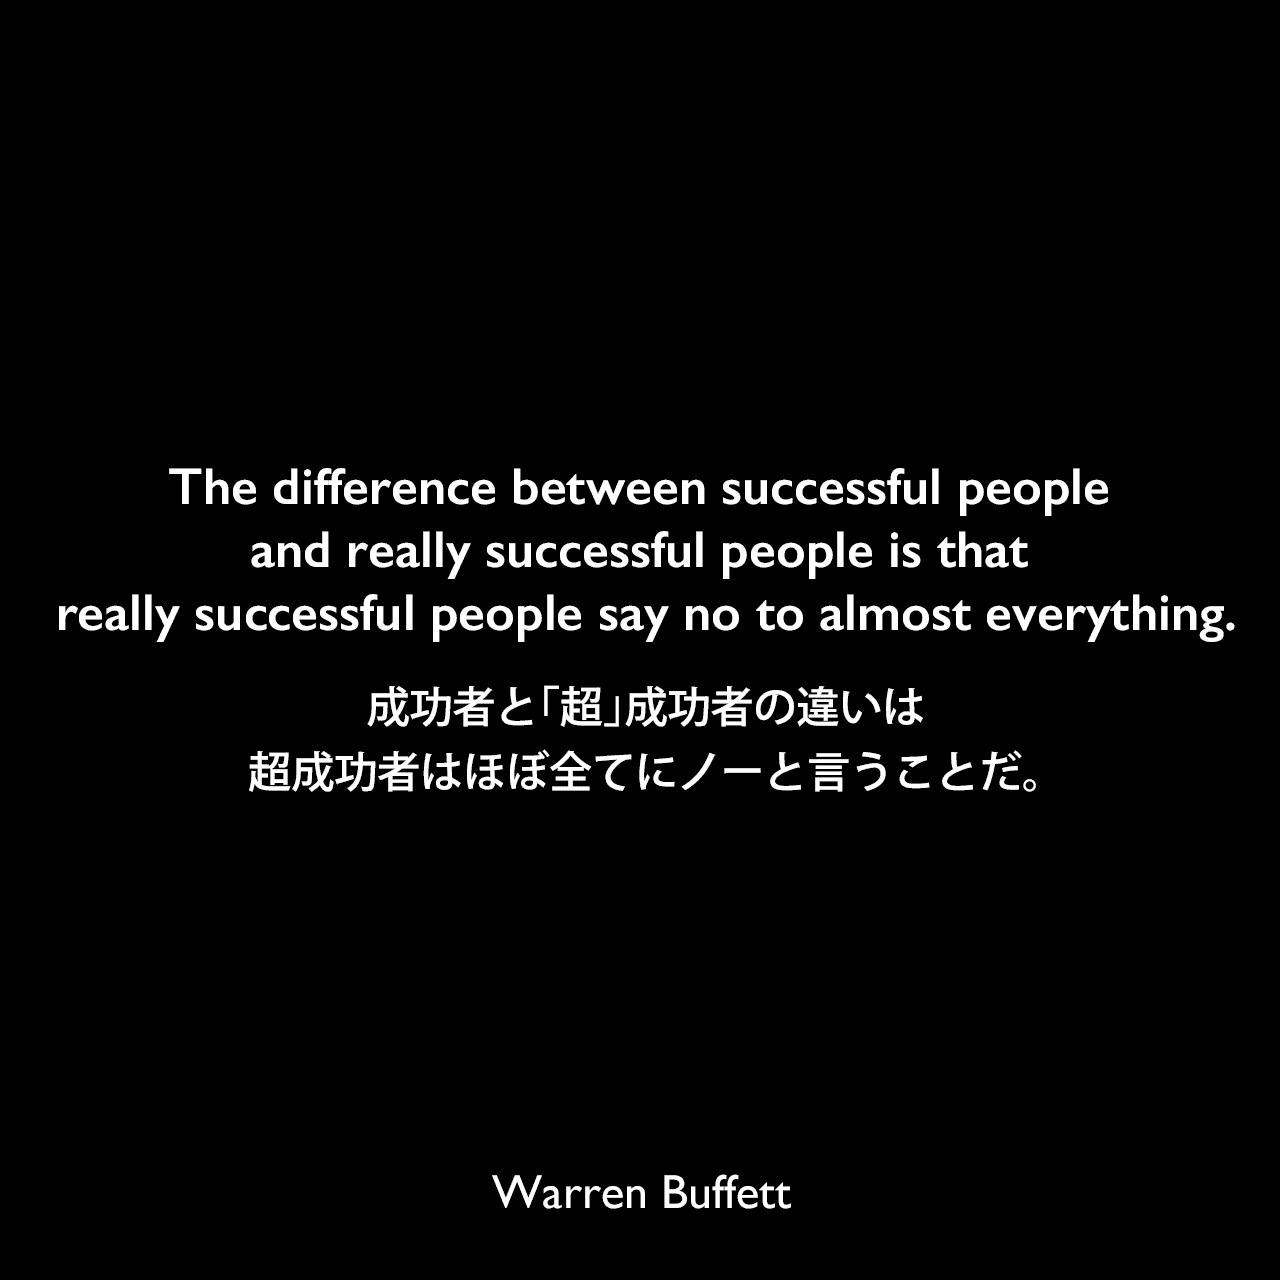 The difference between successful people and really successful people is that really successful people say no to almost everything.成功者と「超」成功者の違いは、超成功者はほぼ全てにノーと言うことだ。Warren Buffett